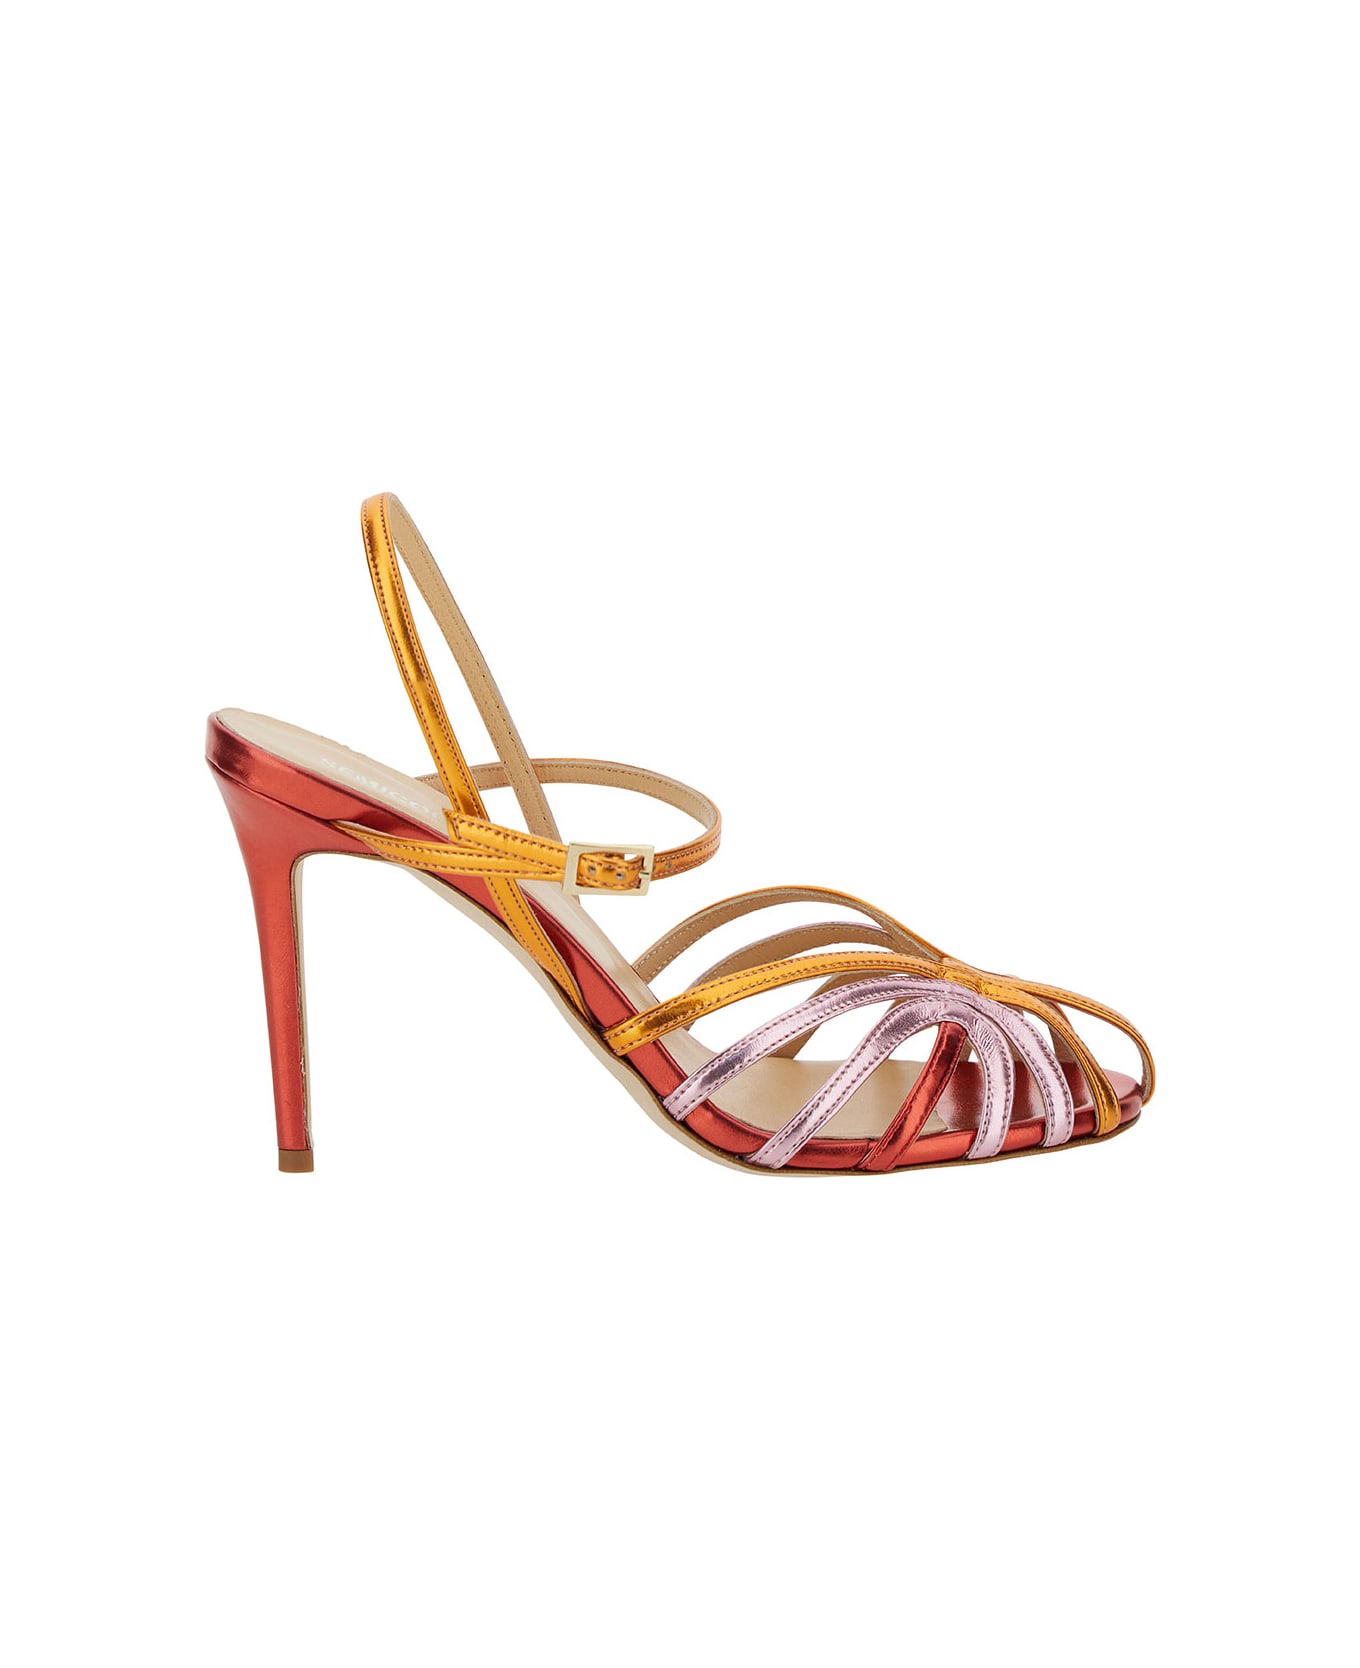 SEMICOUTURE Tricolor Mirrored Sandal With Front Cage In Faux Leather Woman - Multicolor